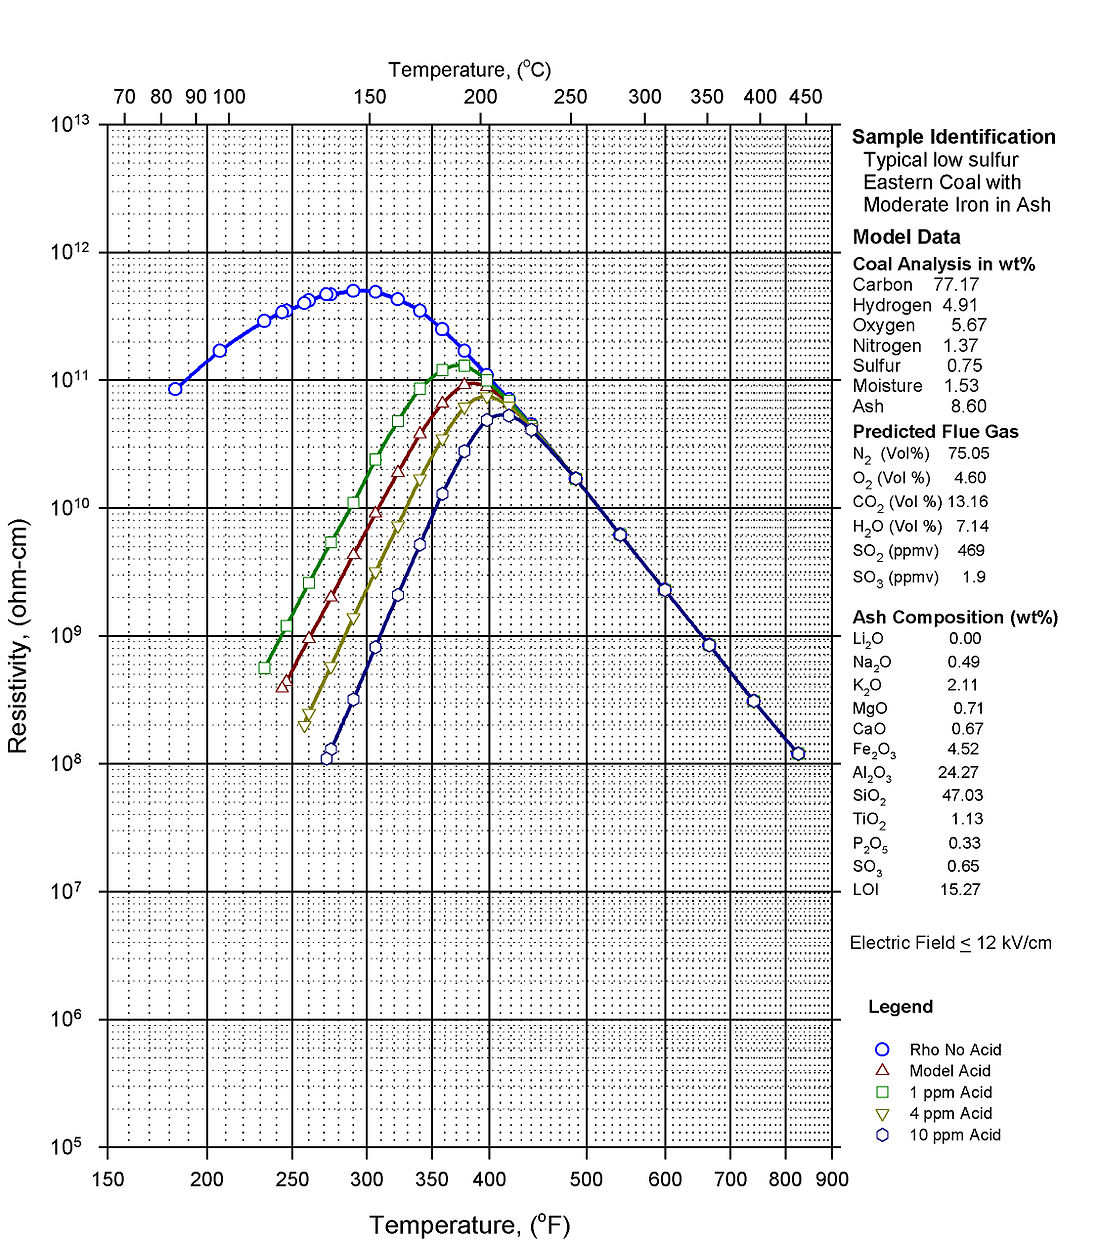 Resistivity Modeled As A Function of Environmental Conditions - Especially Sulfuric Acid Vapor